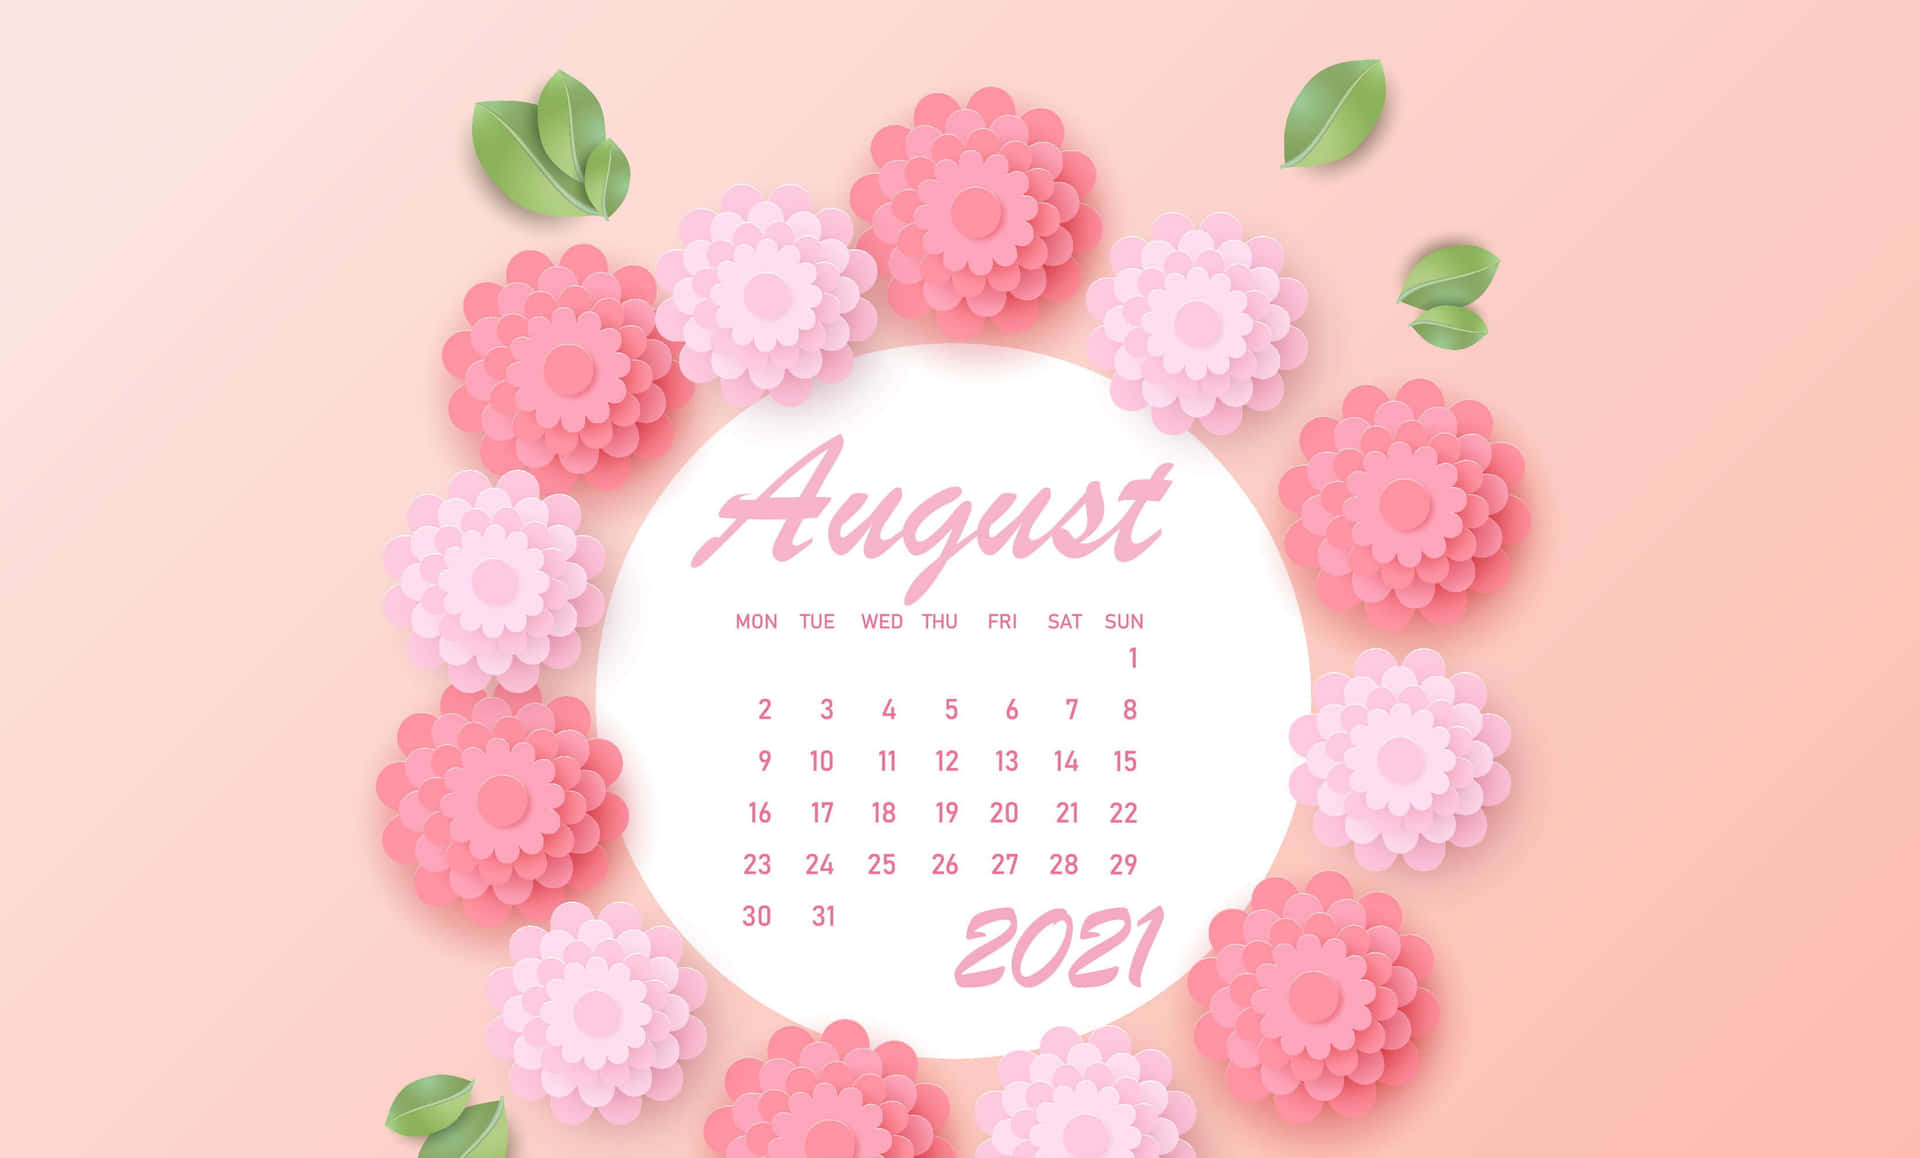 Making the most of the longest days during August